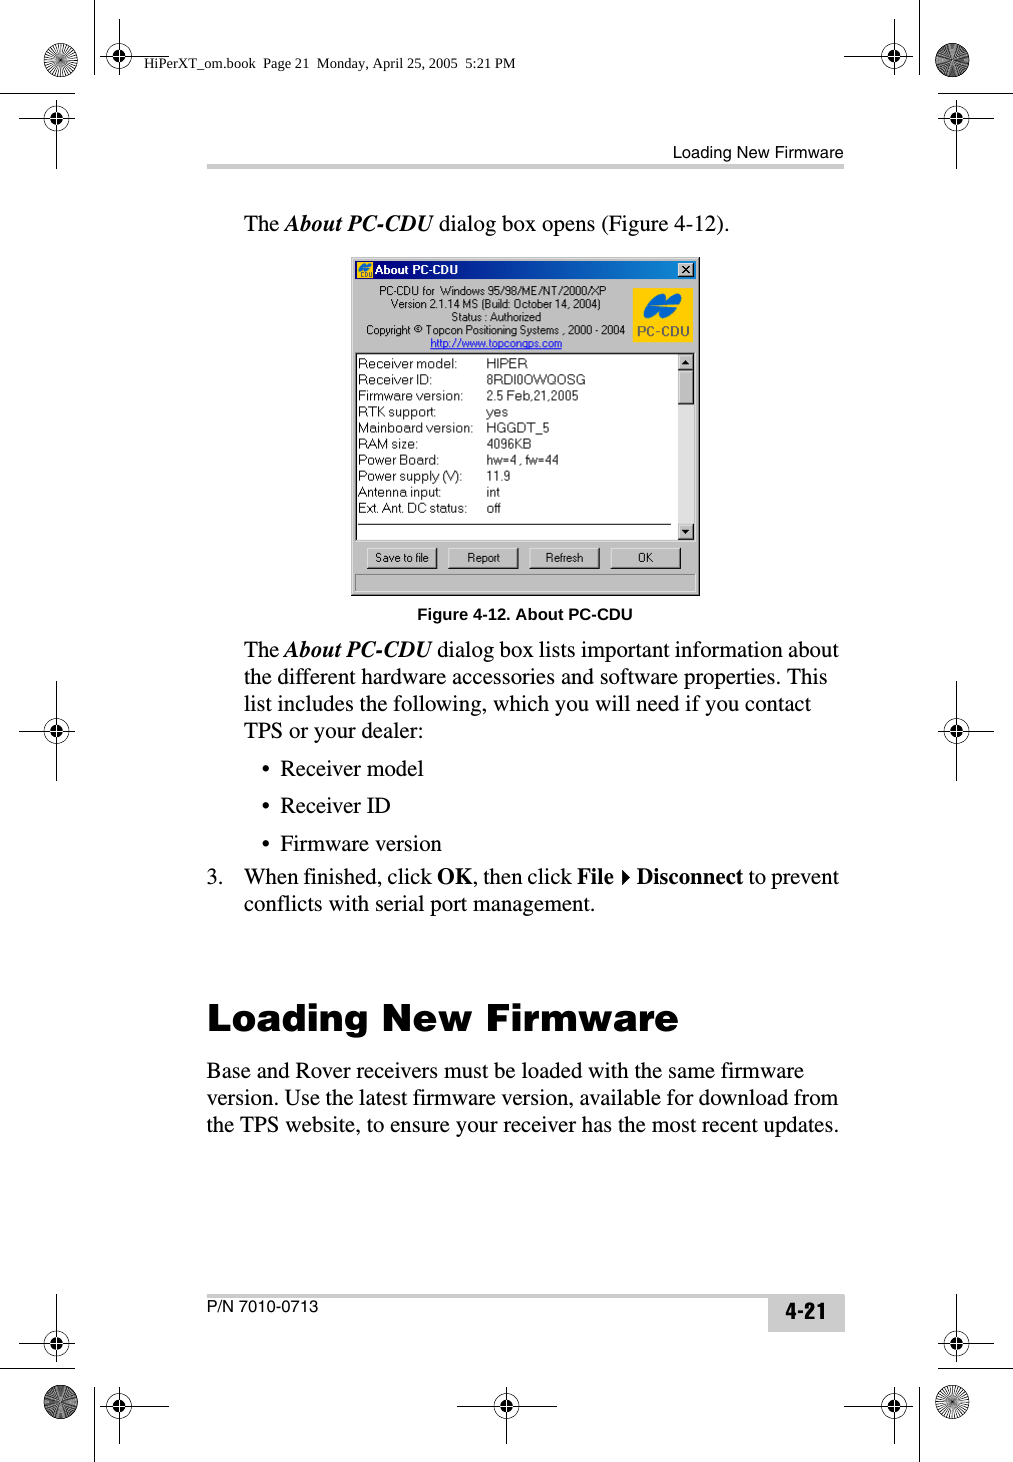 Loading New FirmwareP/N 7010-0713 4-21The About PC-CDU dialog box opens (Figure 4-12). Figure 4-12. About PC-CDUThe About PC-CDU dialog box lists important information about the different hardware accessories and software properties. This list includes the following, which you will need if you contact TPS or your dealer:• Receiver model• Receiver ID• Firmware version3. When finished, click OK, then click FileDisconnect to prevent conflicts with serial port management.Loading New FirmwareBase and Rover receivers must be loaded with the same firmware version. Use the latest firmware version, available for download from the TPS website, to ensure your receiver has the most recent updates.HiPerXT_om.book  Page 21  Monday, April 25, 2005  5:21 PM